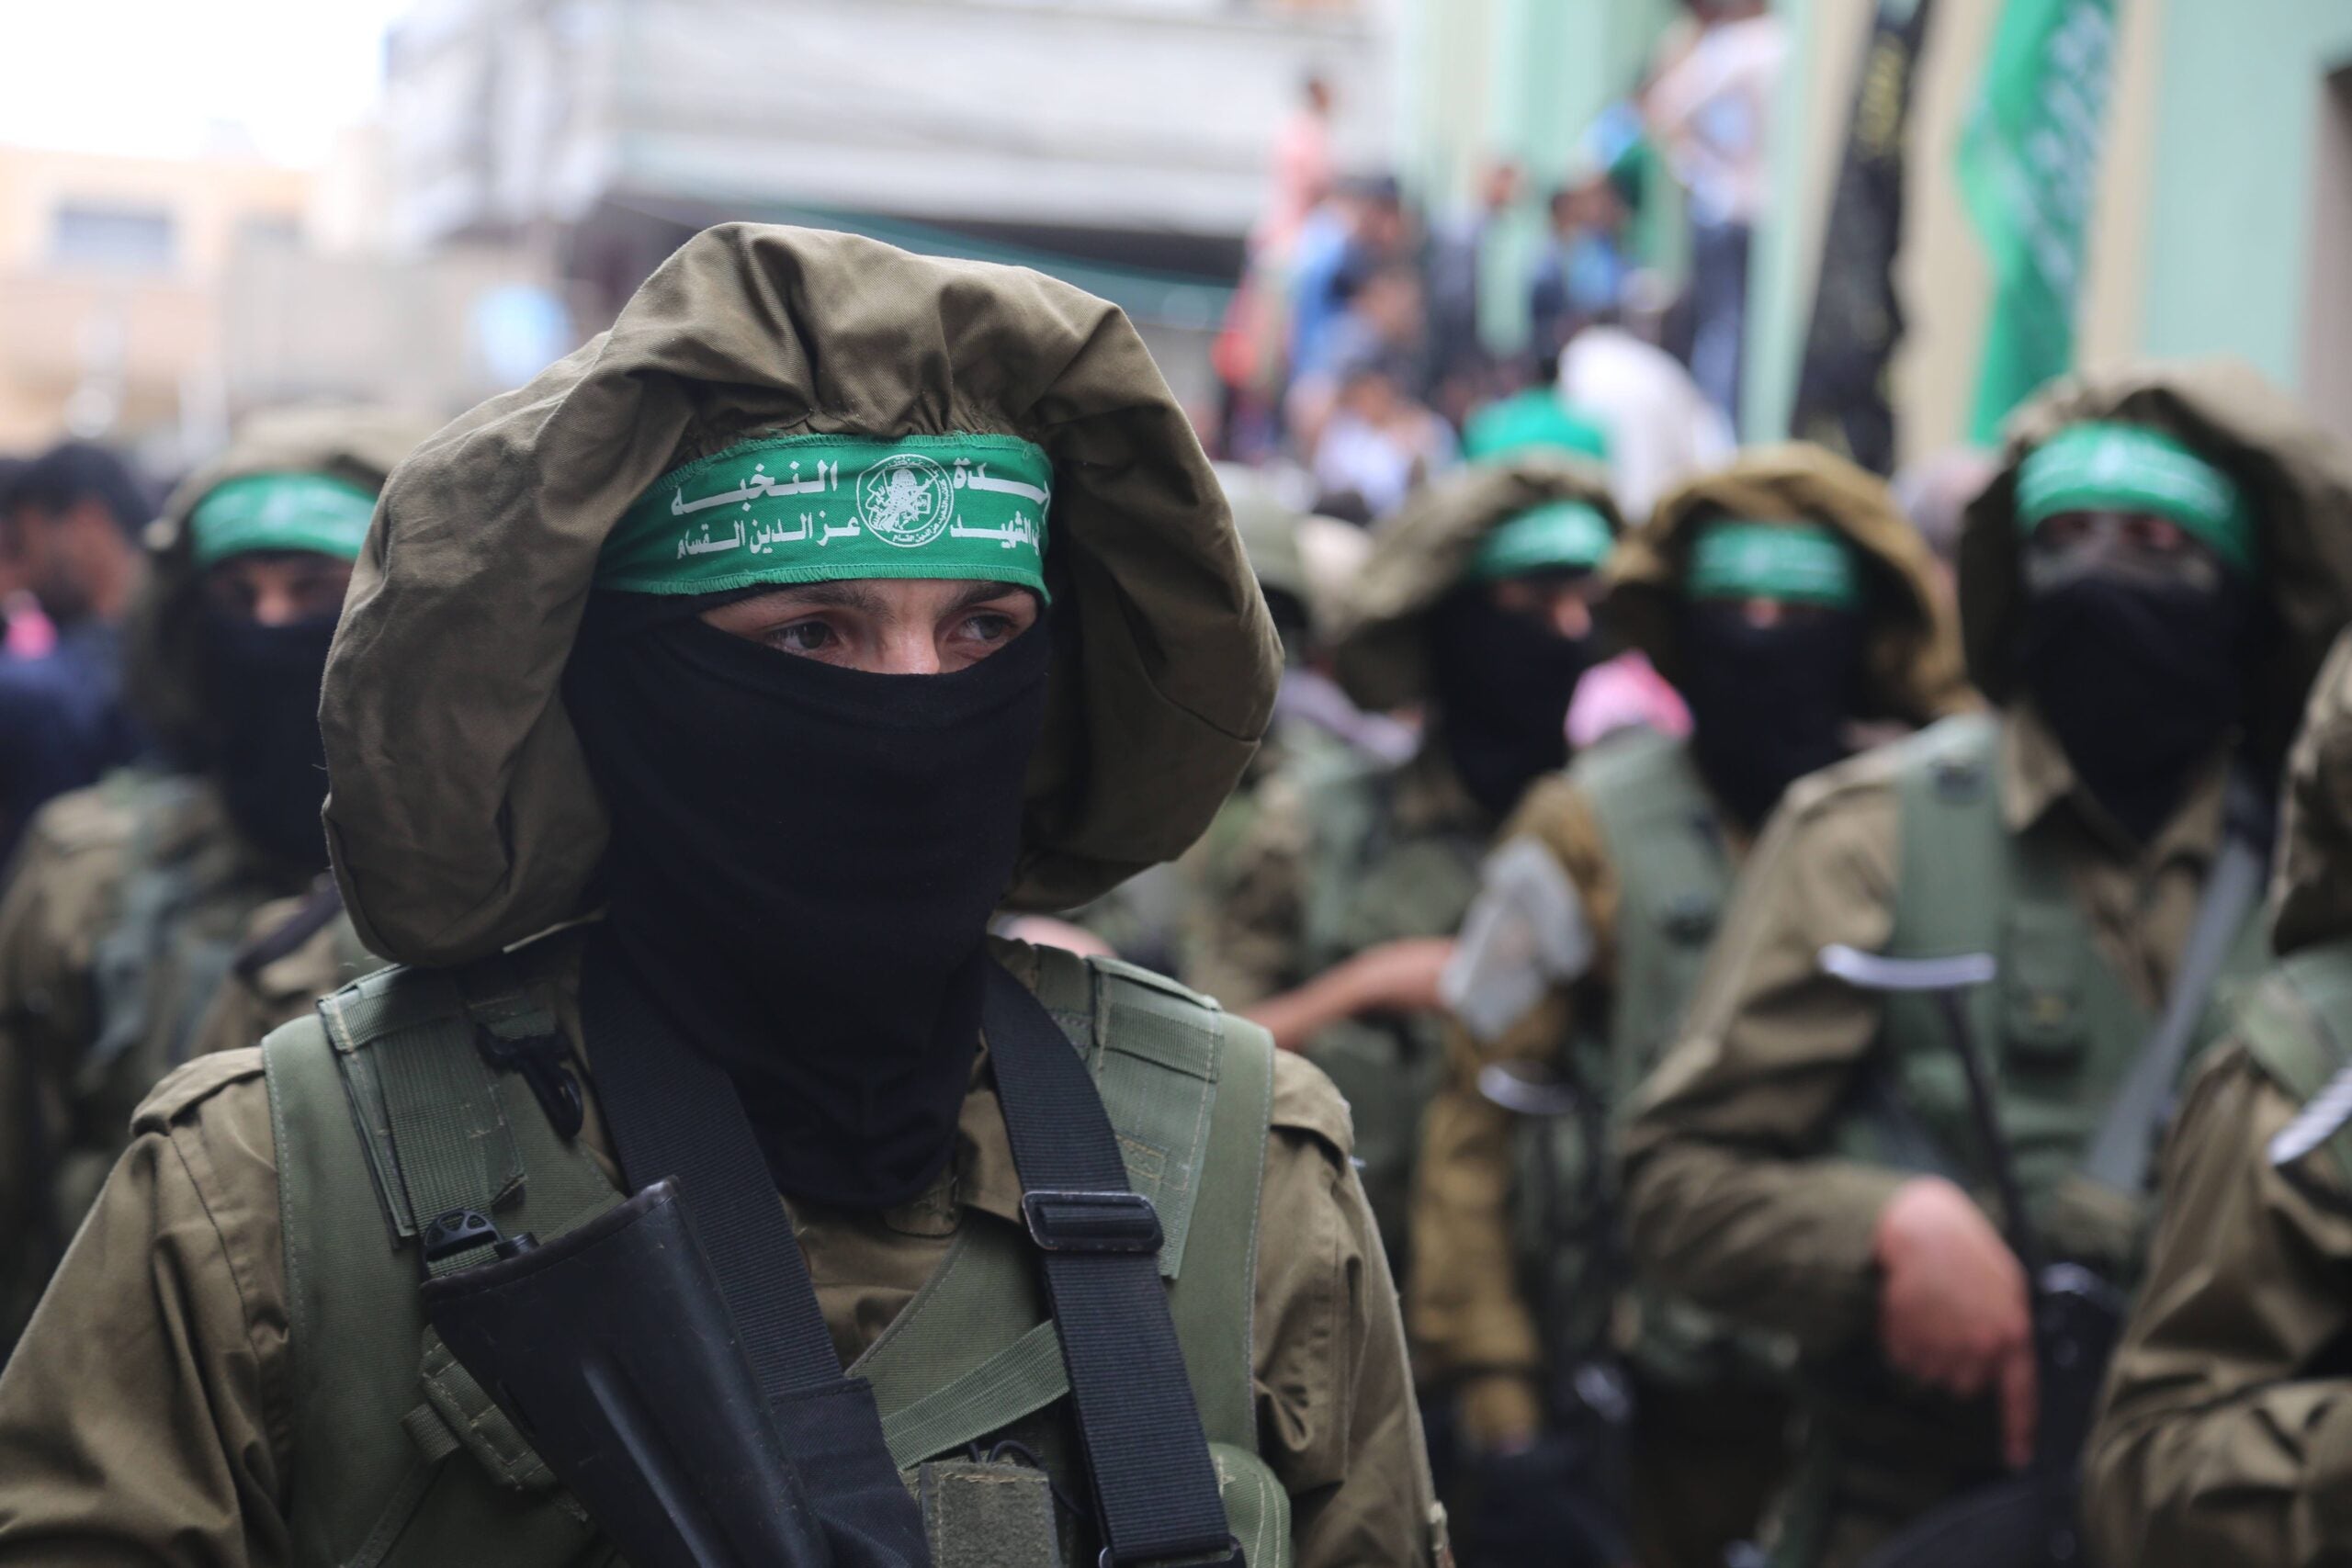 Members of the Islamist movement Hamas' military wing Al-Qassam Brigades during the funeral of six of their comrades who were killed in an unexplained explosion the night before, in Deir al-Balah in the central Gaza strip on May 6, 2018. Gaza's health ministry confirmed six people were killed and three others wounded in what residents said appeared to be an accidental explosion in the Az-Zawayda area of the central Gaza Strip. Al-Qassam Brigades blamed Israel for the explosion without providing details or proof, saying incident occurred during a "complex security and intelligence operation" and calling it a "serious and large security incident".  (Photo by Majdi Fathi/NurPhoto)